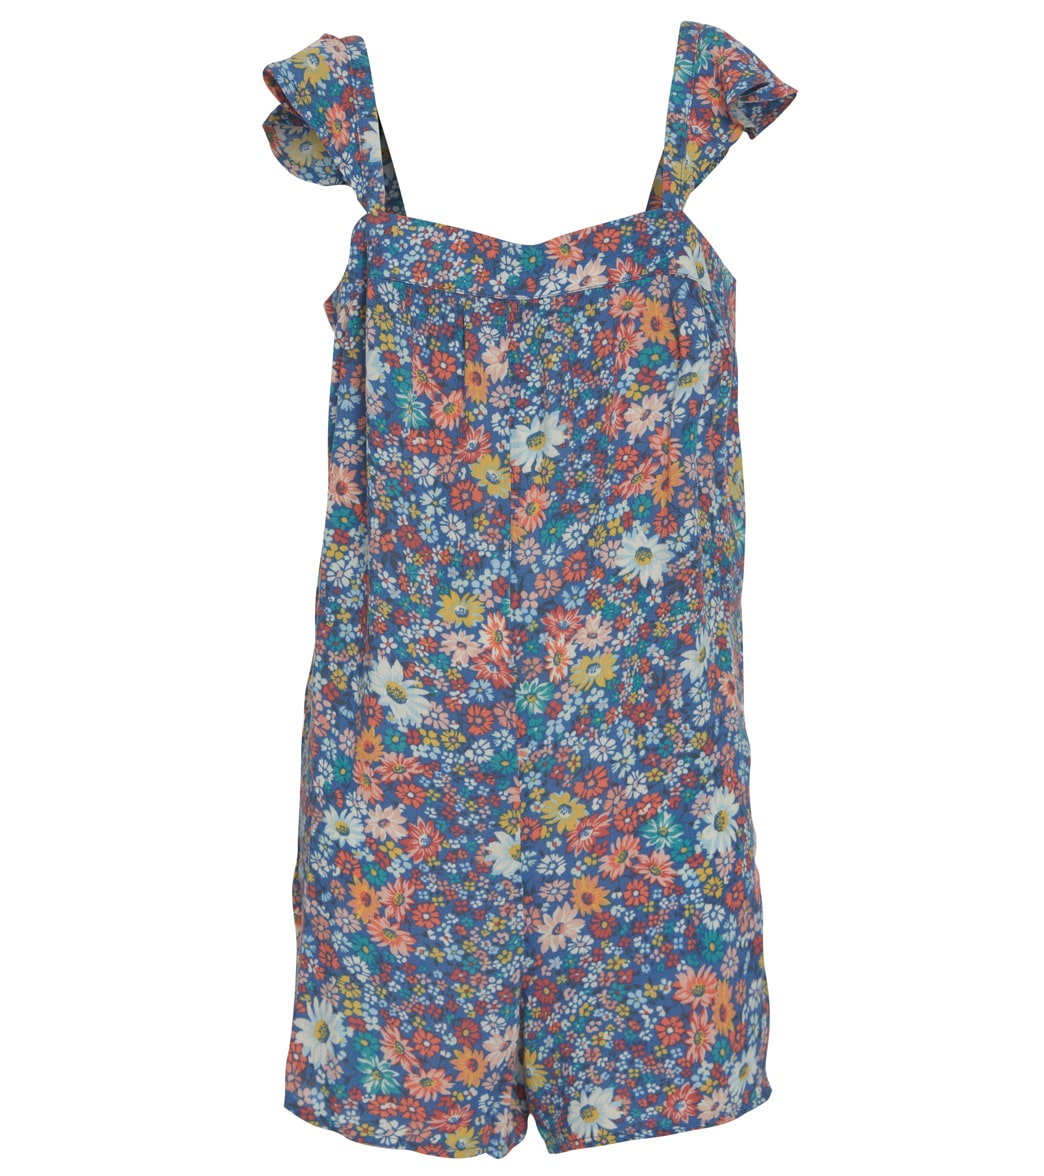 O'neill Girls' Augie Romper - Classic Blue Large - Swimoutlet.com